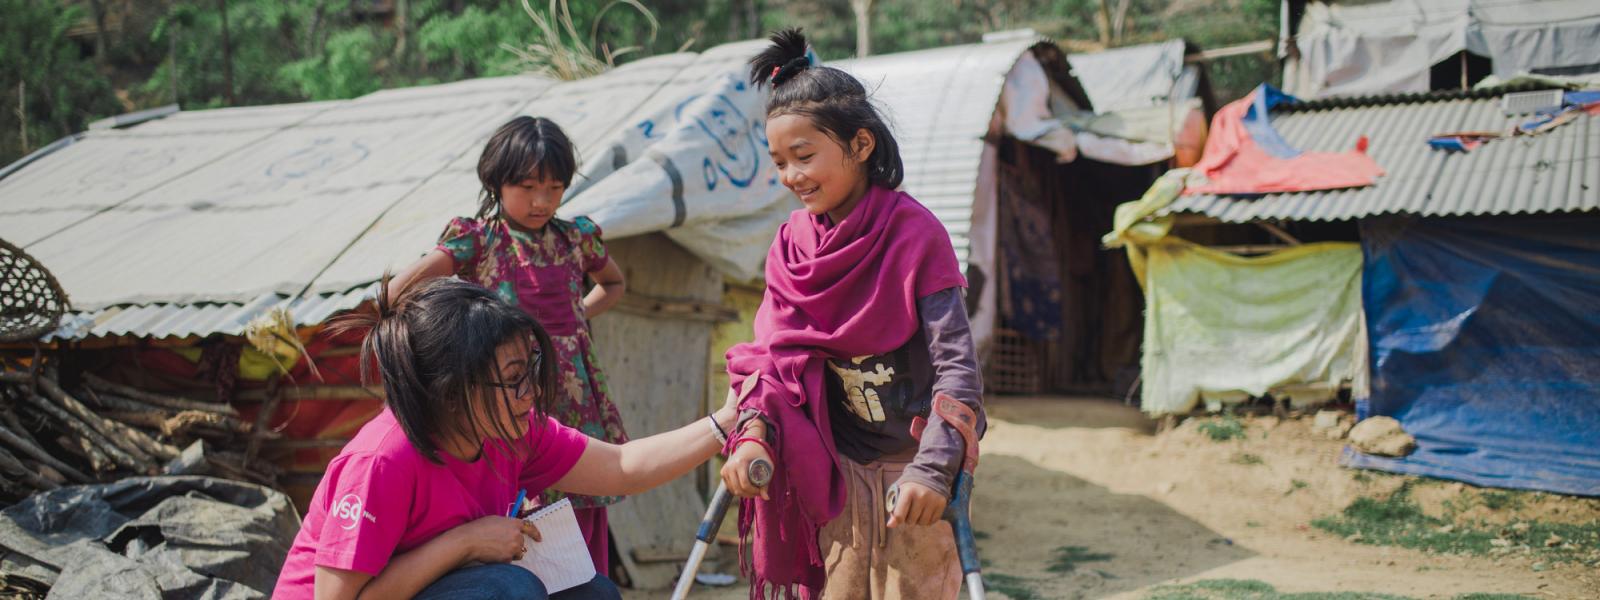 A volunteer crouches to help a young girl learn to use crutches, outside in Dhading camp for internally displaced peoples.